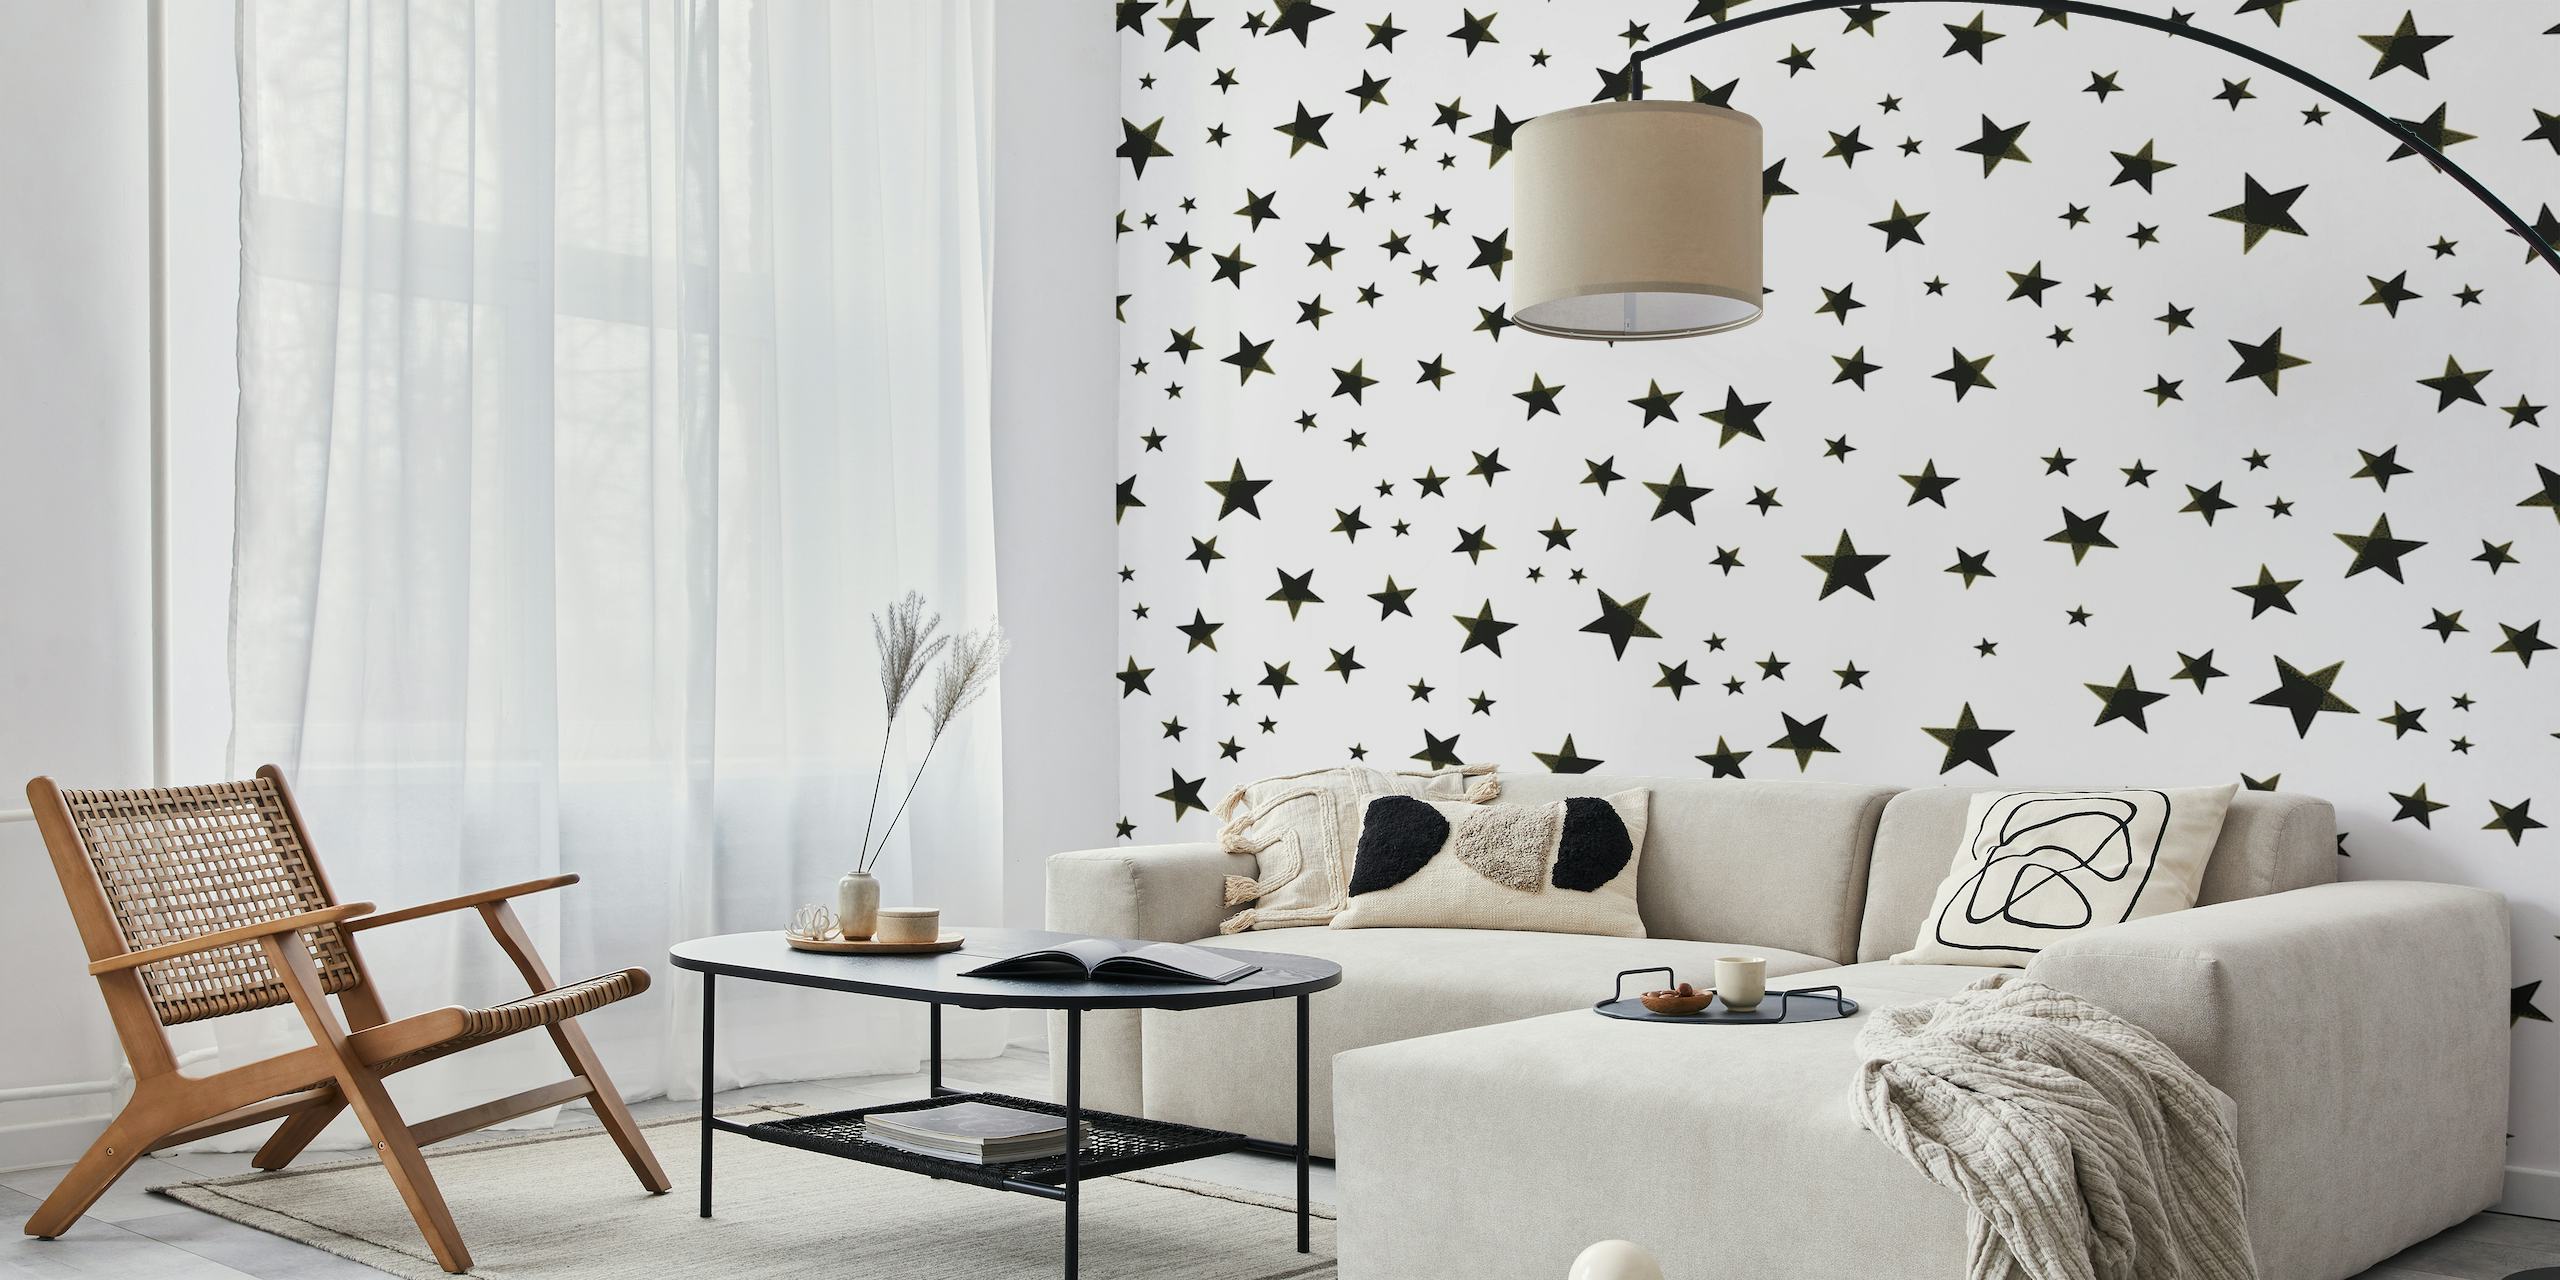 Shining golden and white stars papel de parede